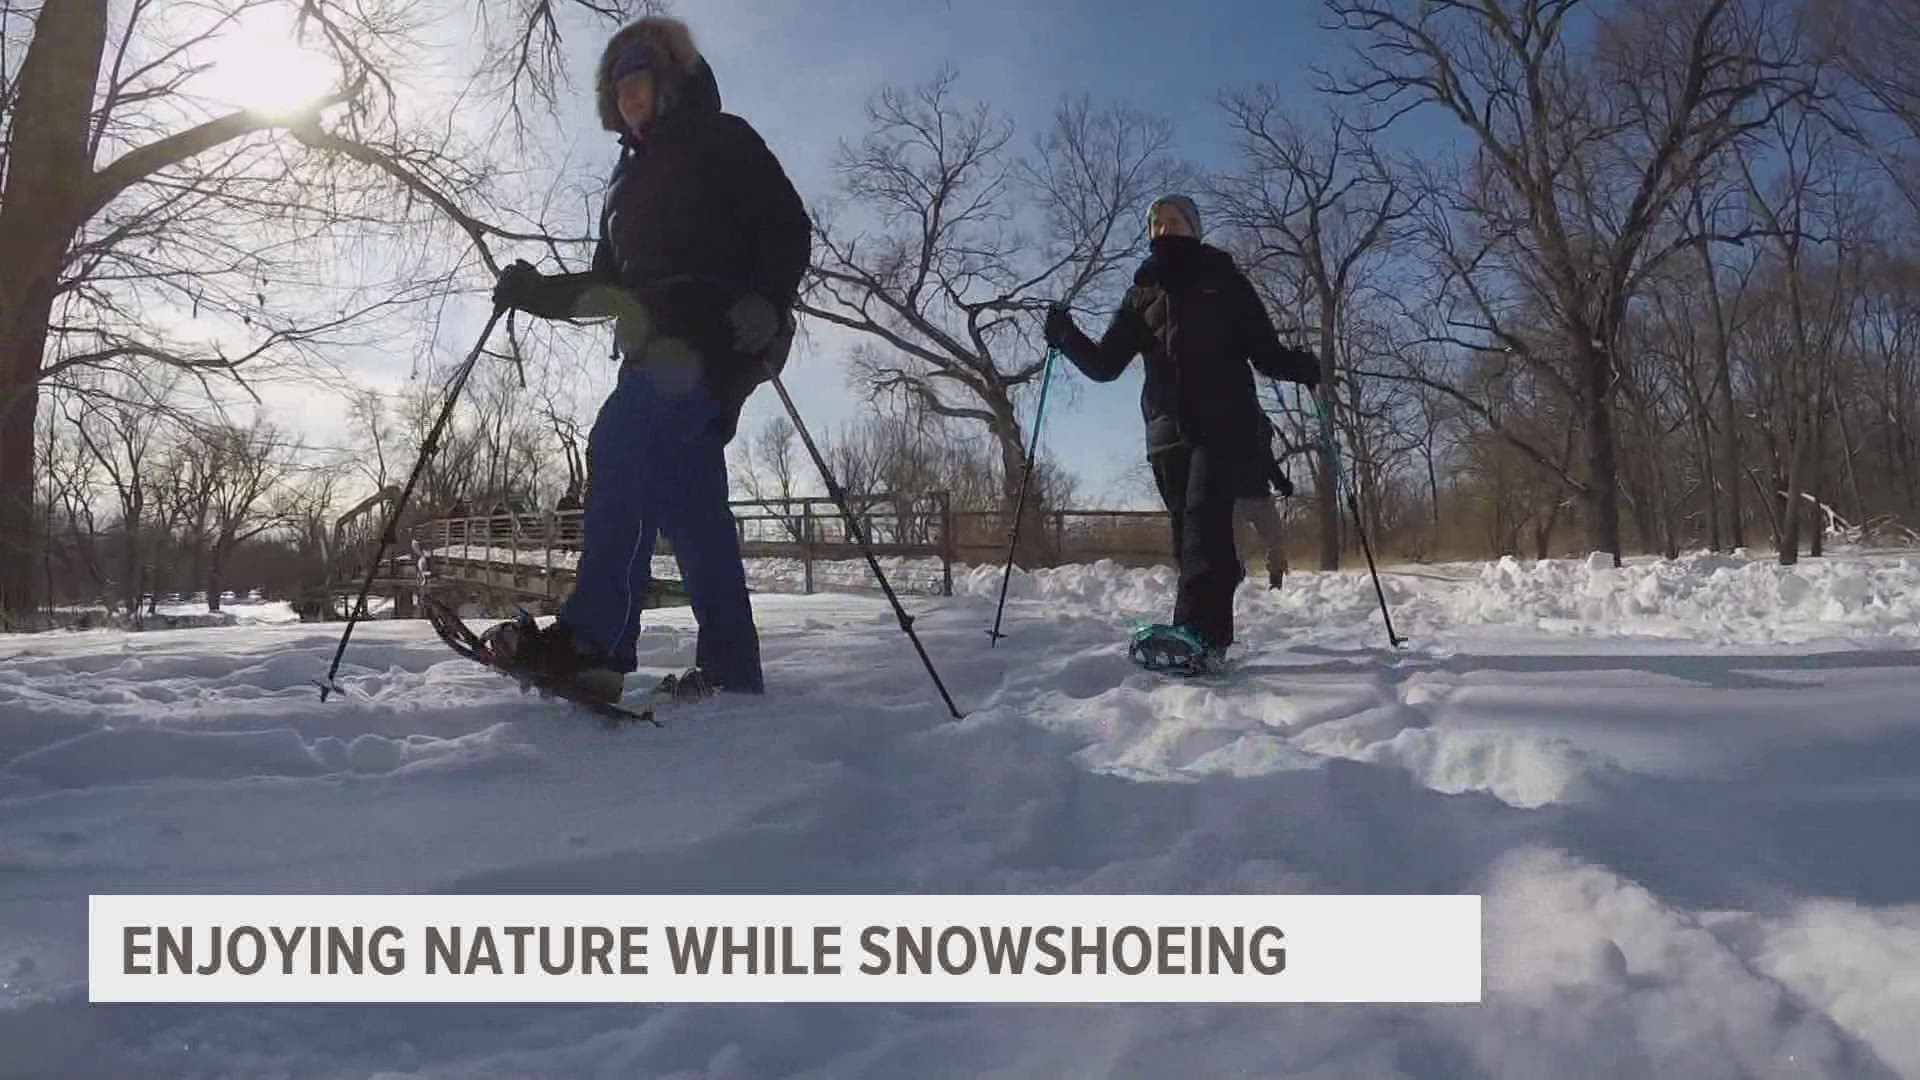 Above and Beyond Cancer led a snowshoeing adventure Wednesday through Des Moines' Water Works Park.